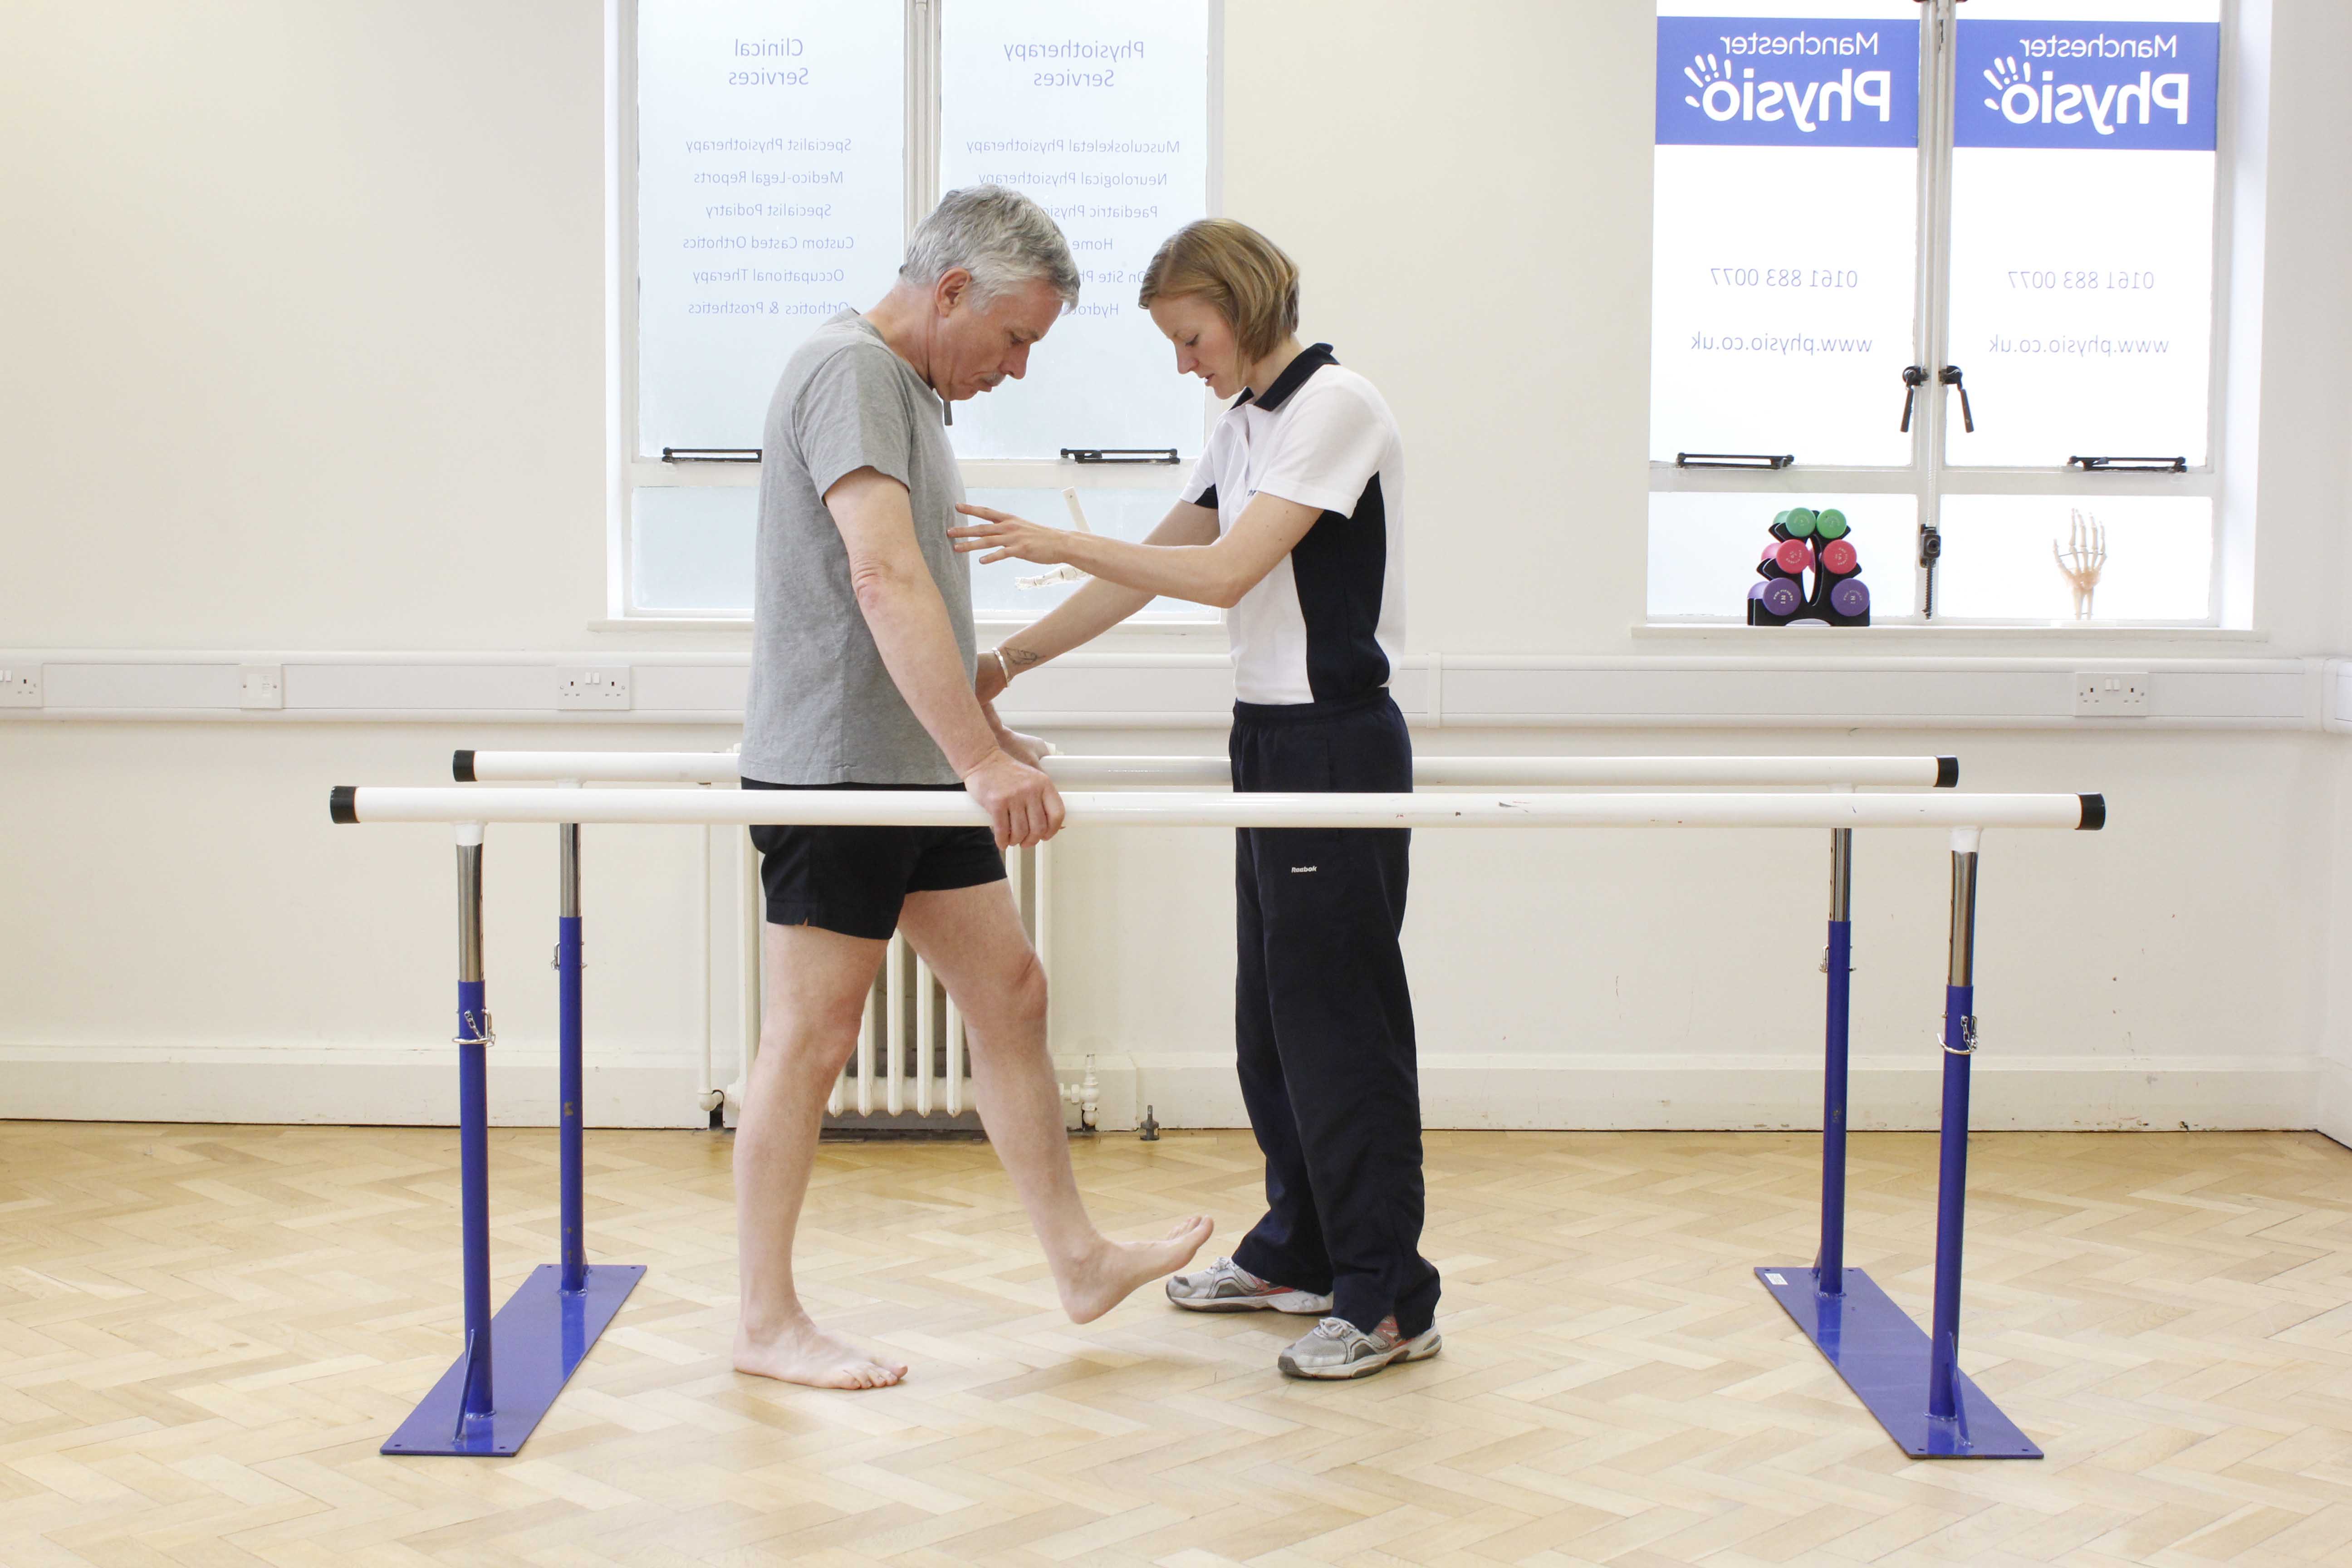 Mobility exercises between the parallel bars assisted by specialist neurological physiotherapist